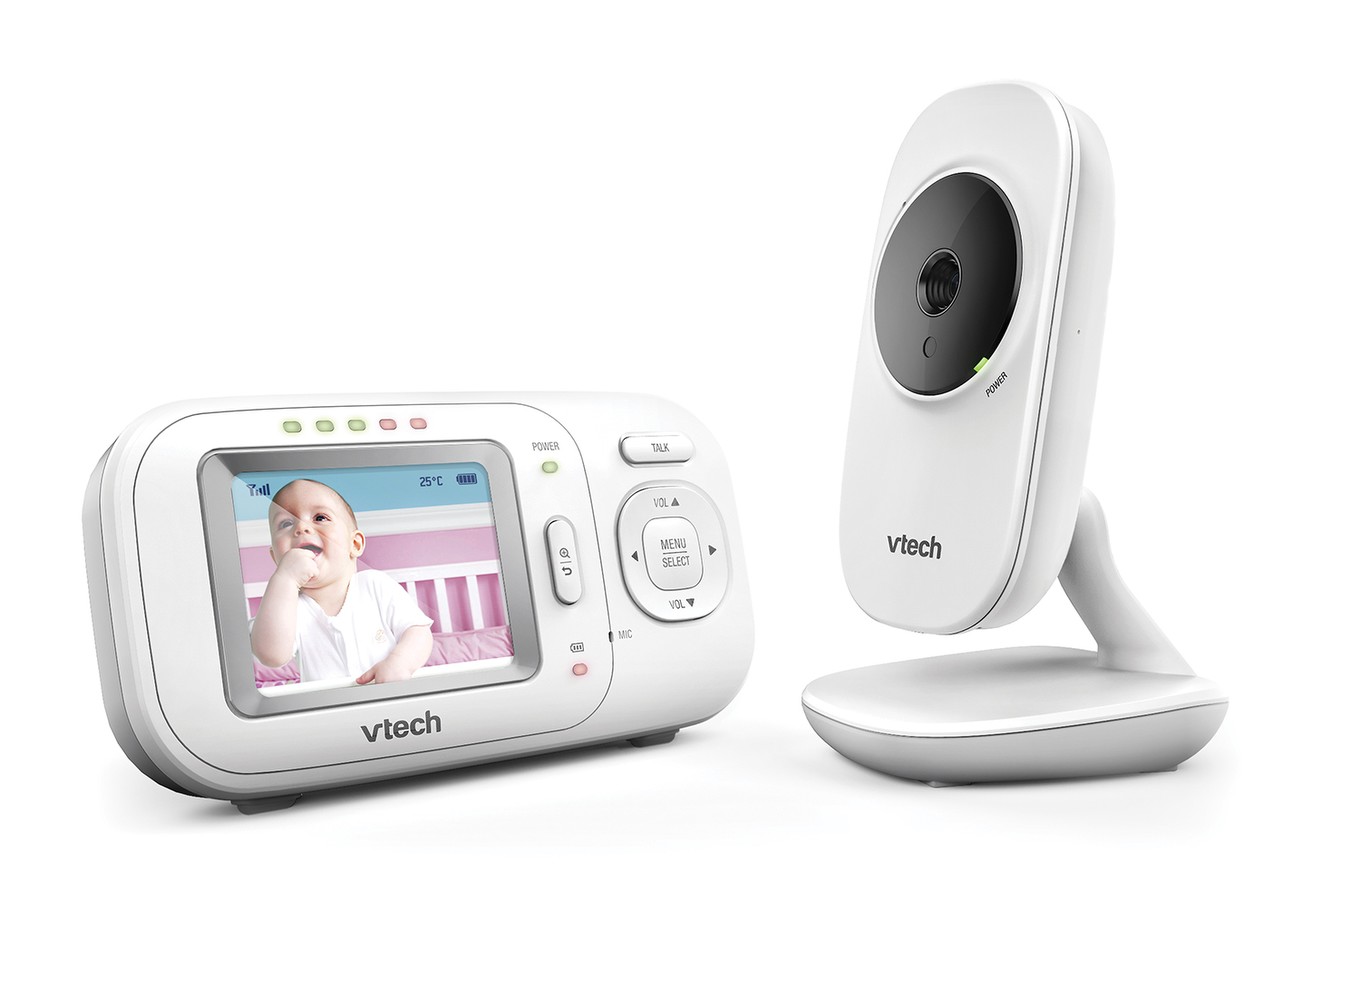 How To Reset Vtech Baby Monitor